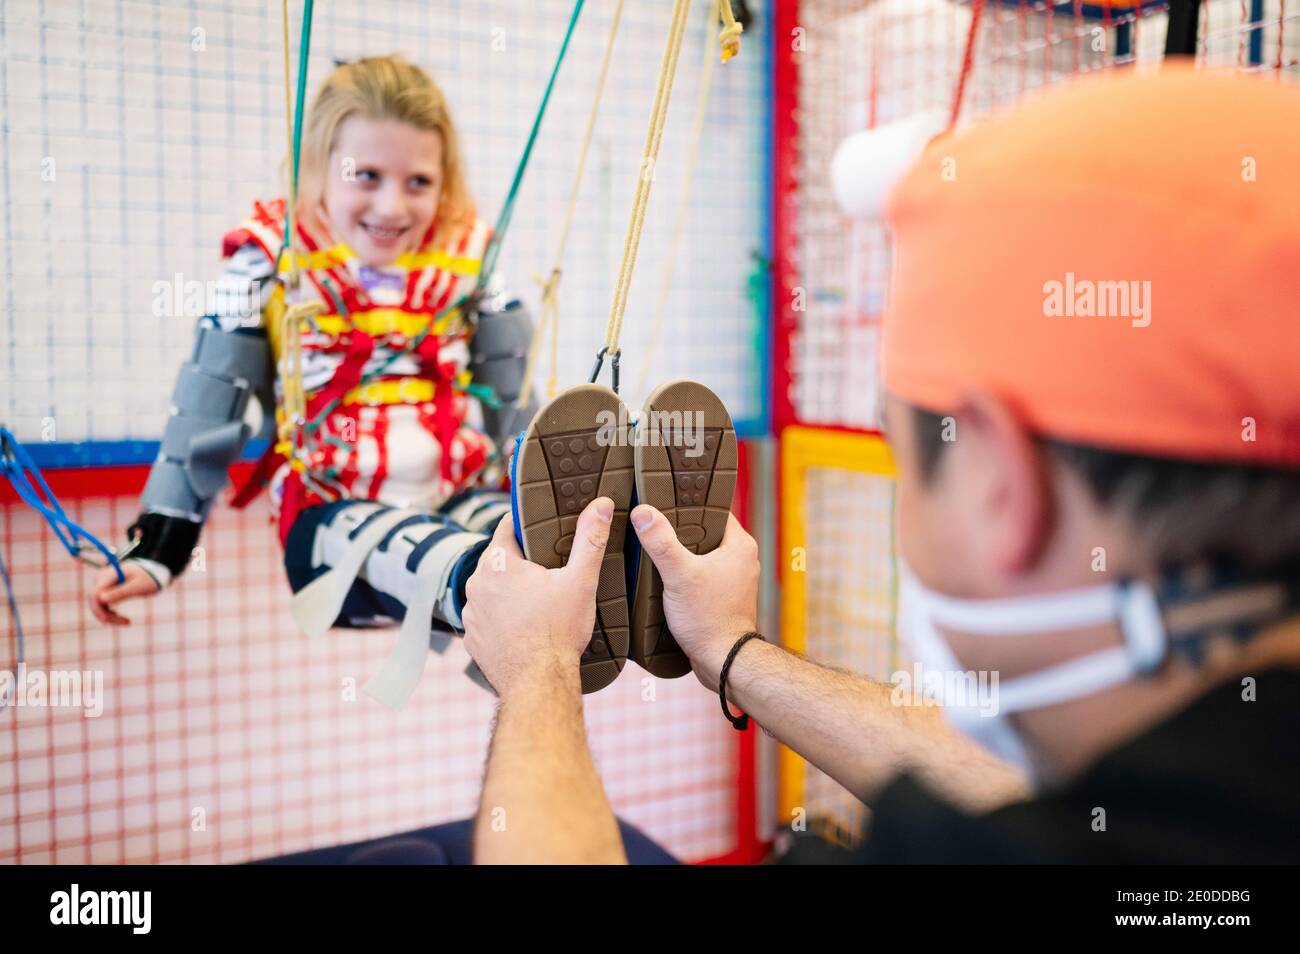 Crop anonymous specialist giving support to girl with Angelman syndrome during rehabilitation training with elastic straps Stock Photo